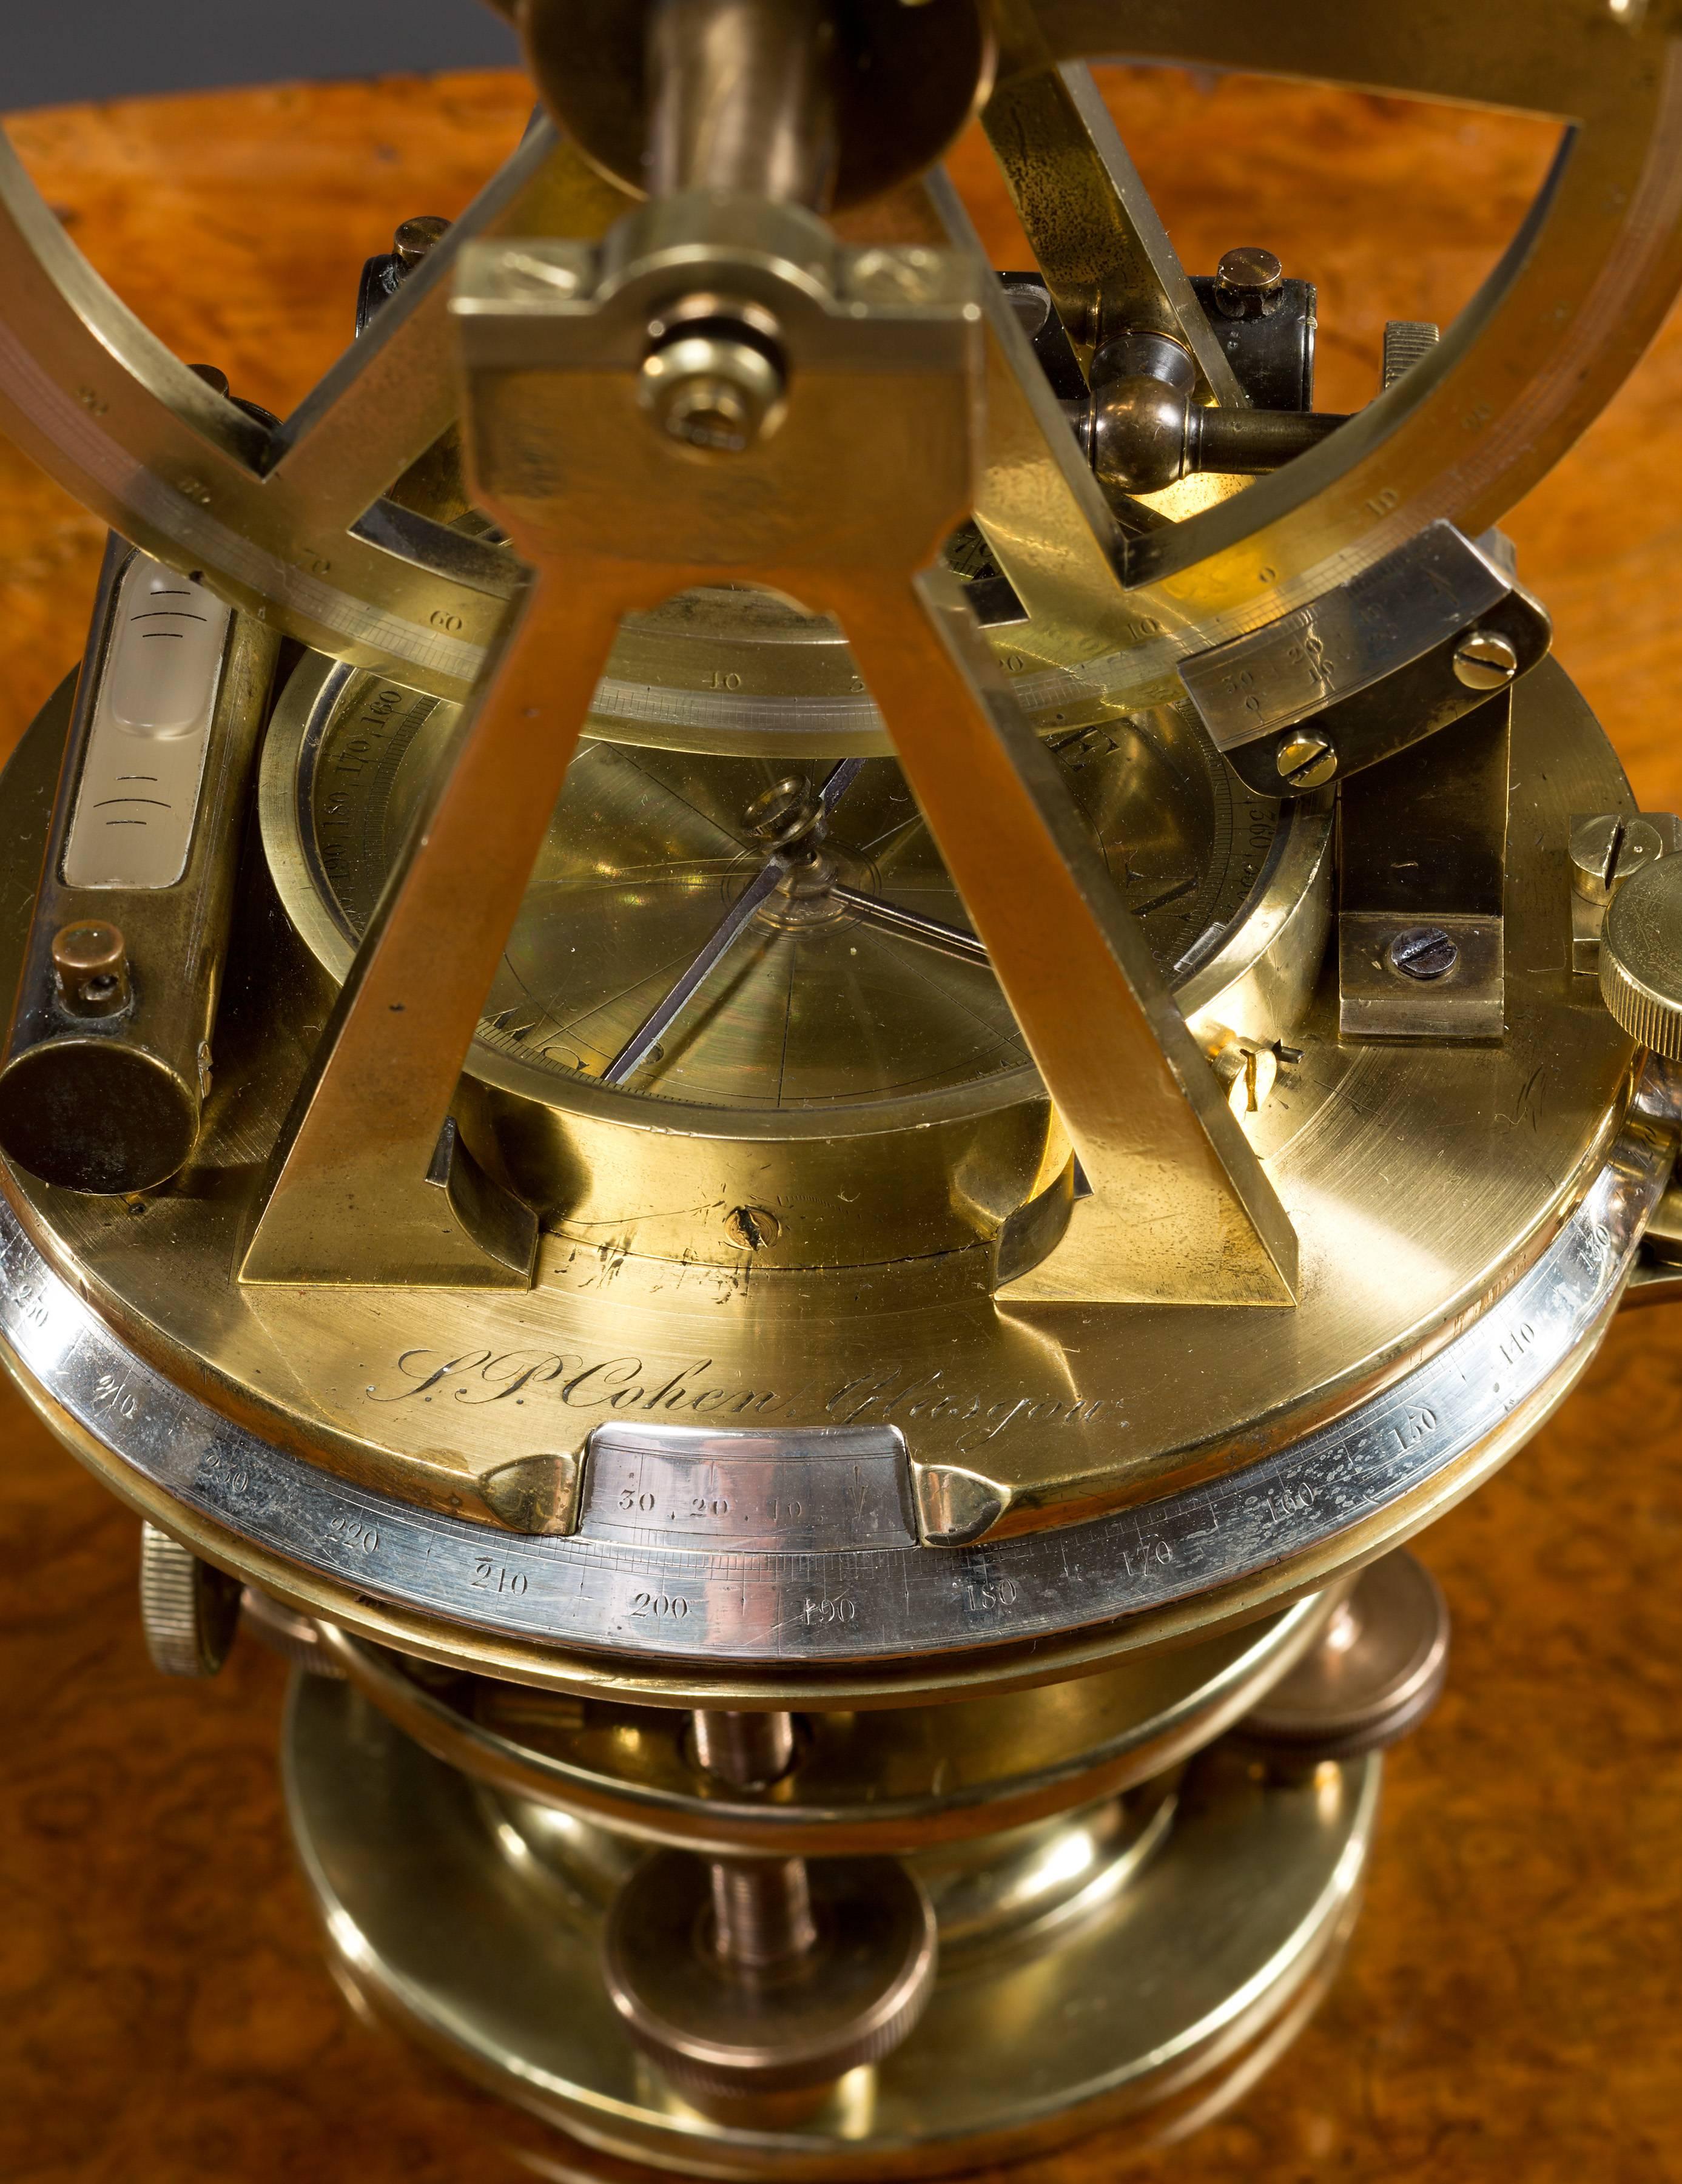 19th century laquered brassTheodolite By S.P.Cohen, Glasgow


Extending telescope with rack and pinion focusing and centrally mounted spirit level, located on the limb with twin clamps, half vertical circle inset with vernier scale marked from 0